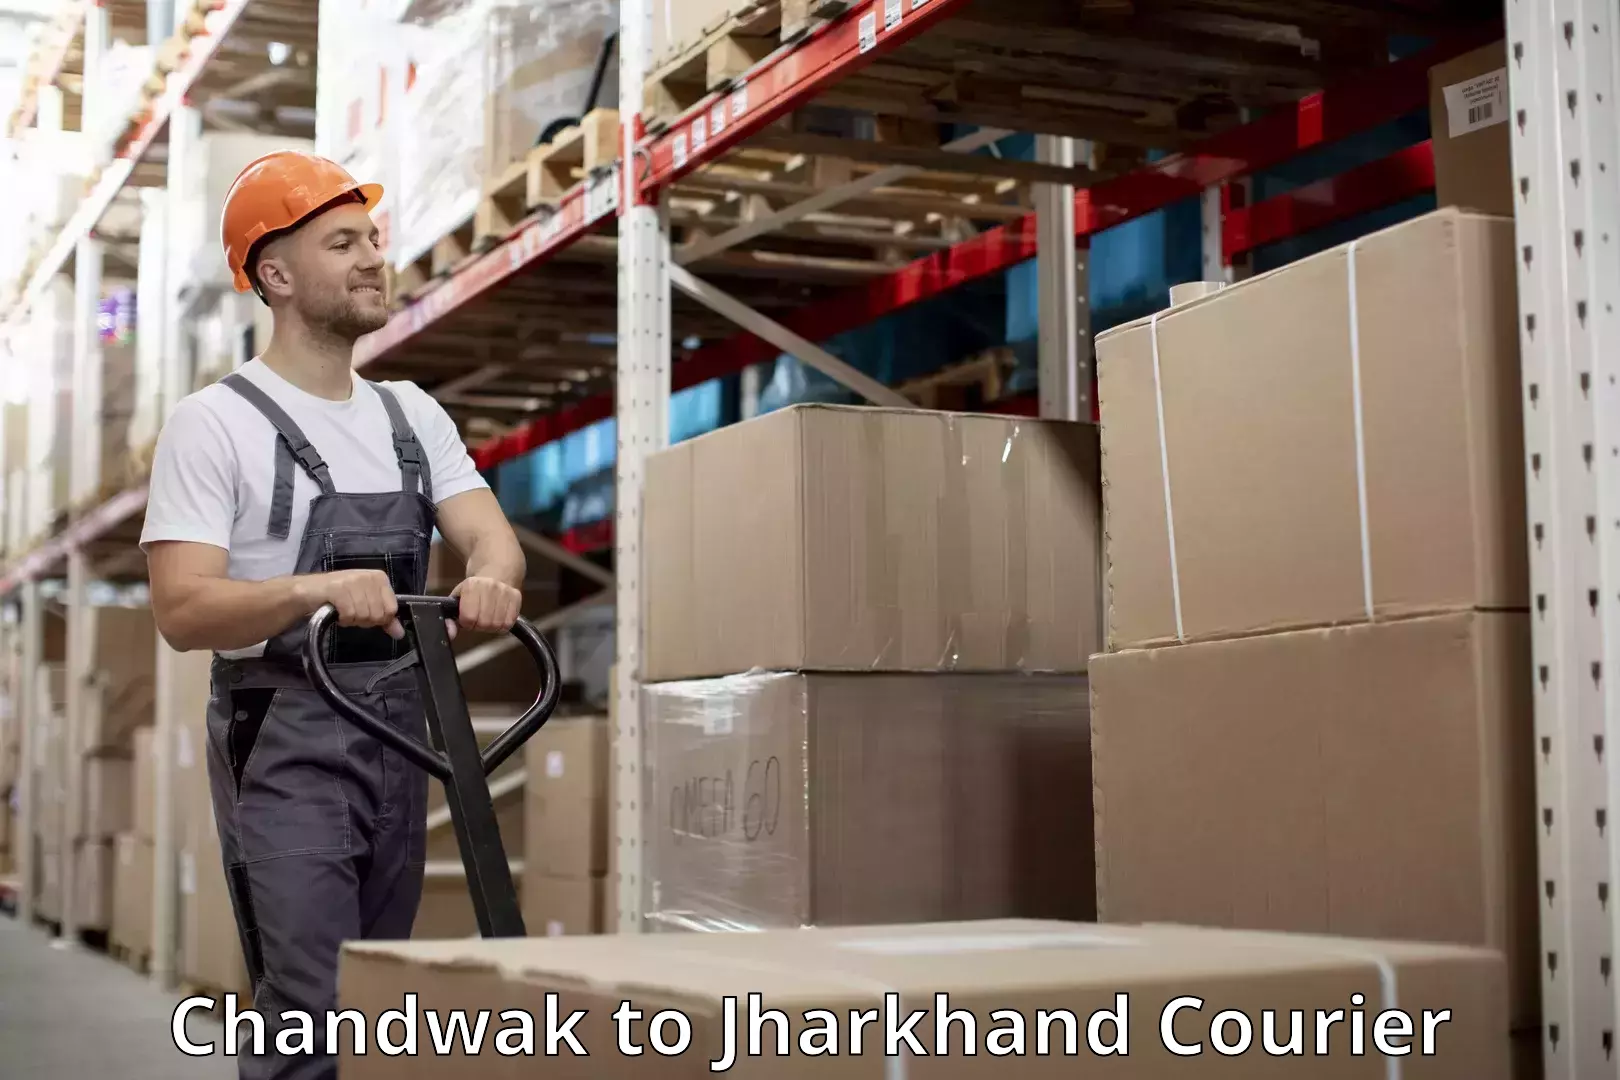 Luggage transport consultancy Chandwak to Jharkhand